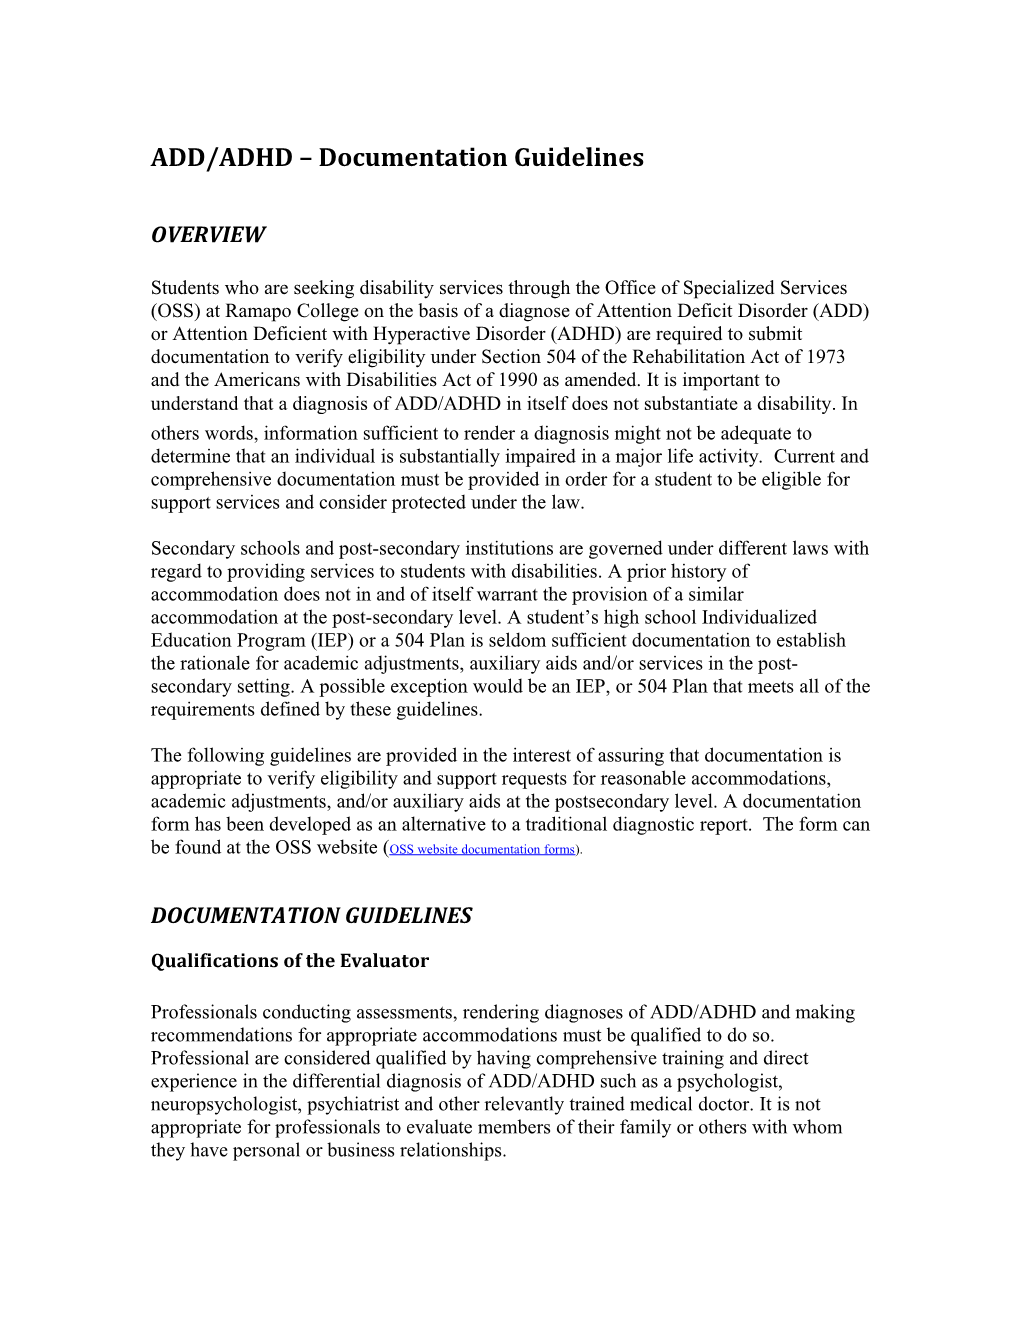 Learning Disabilities Documentation Requirements